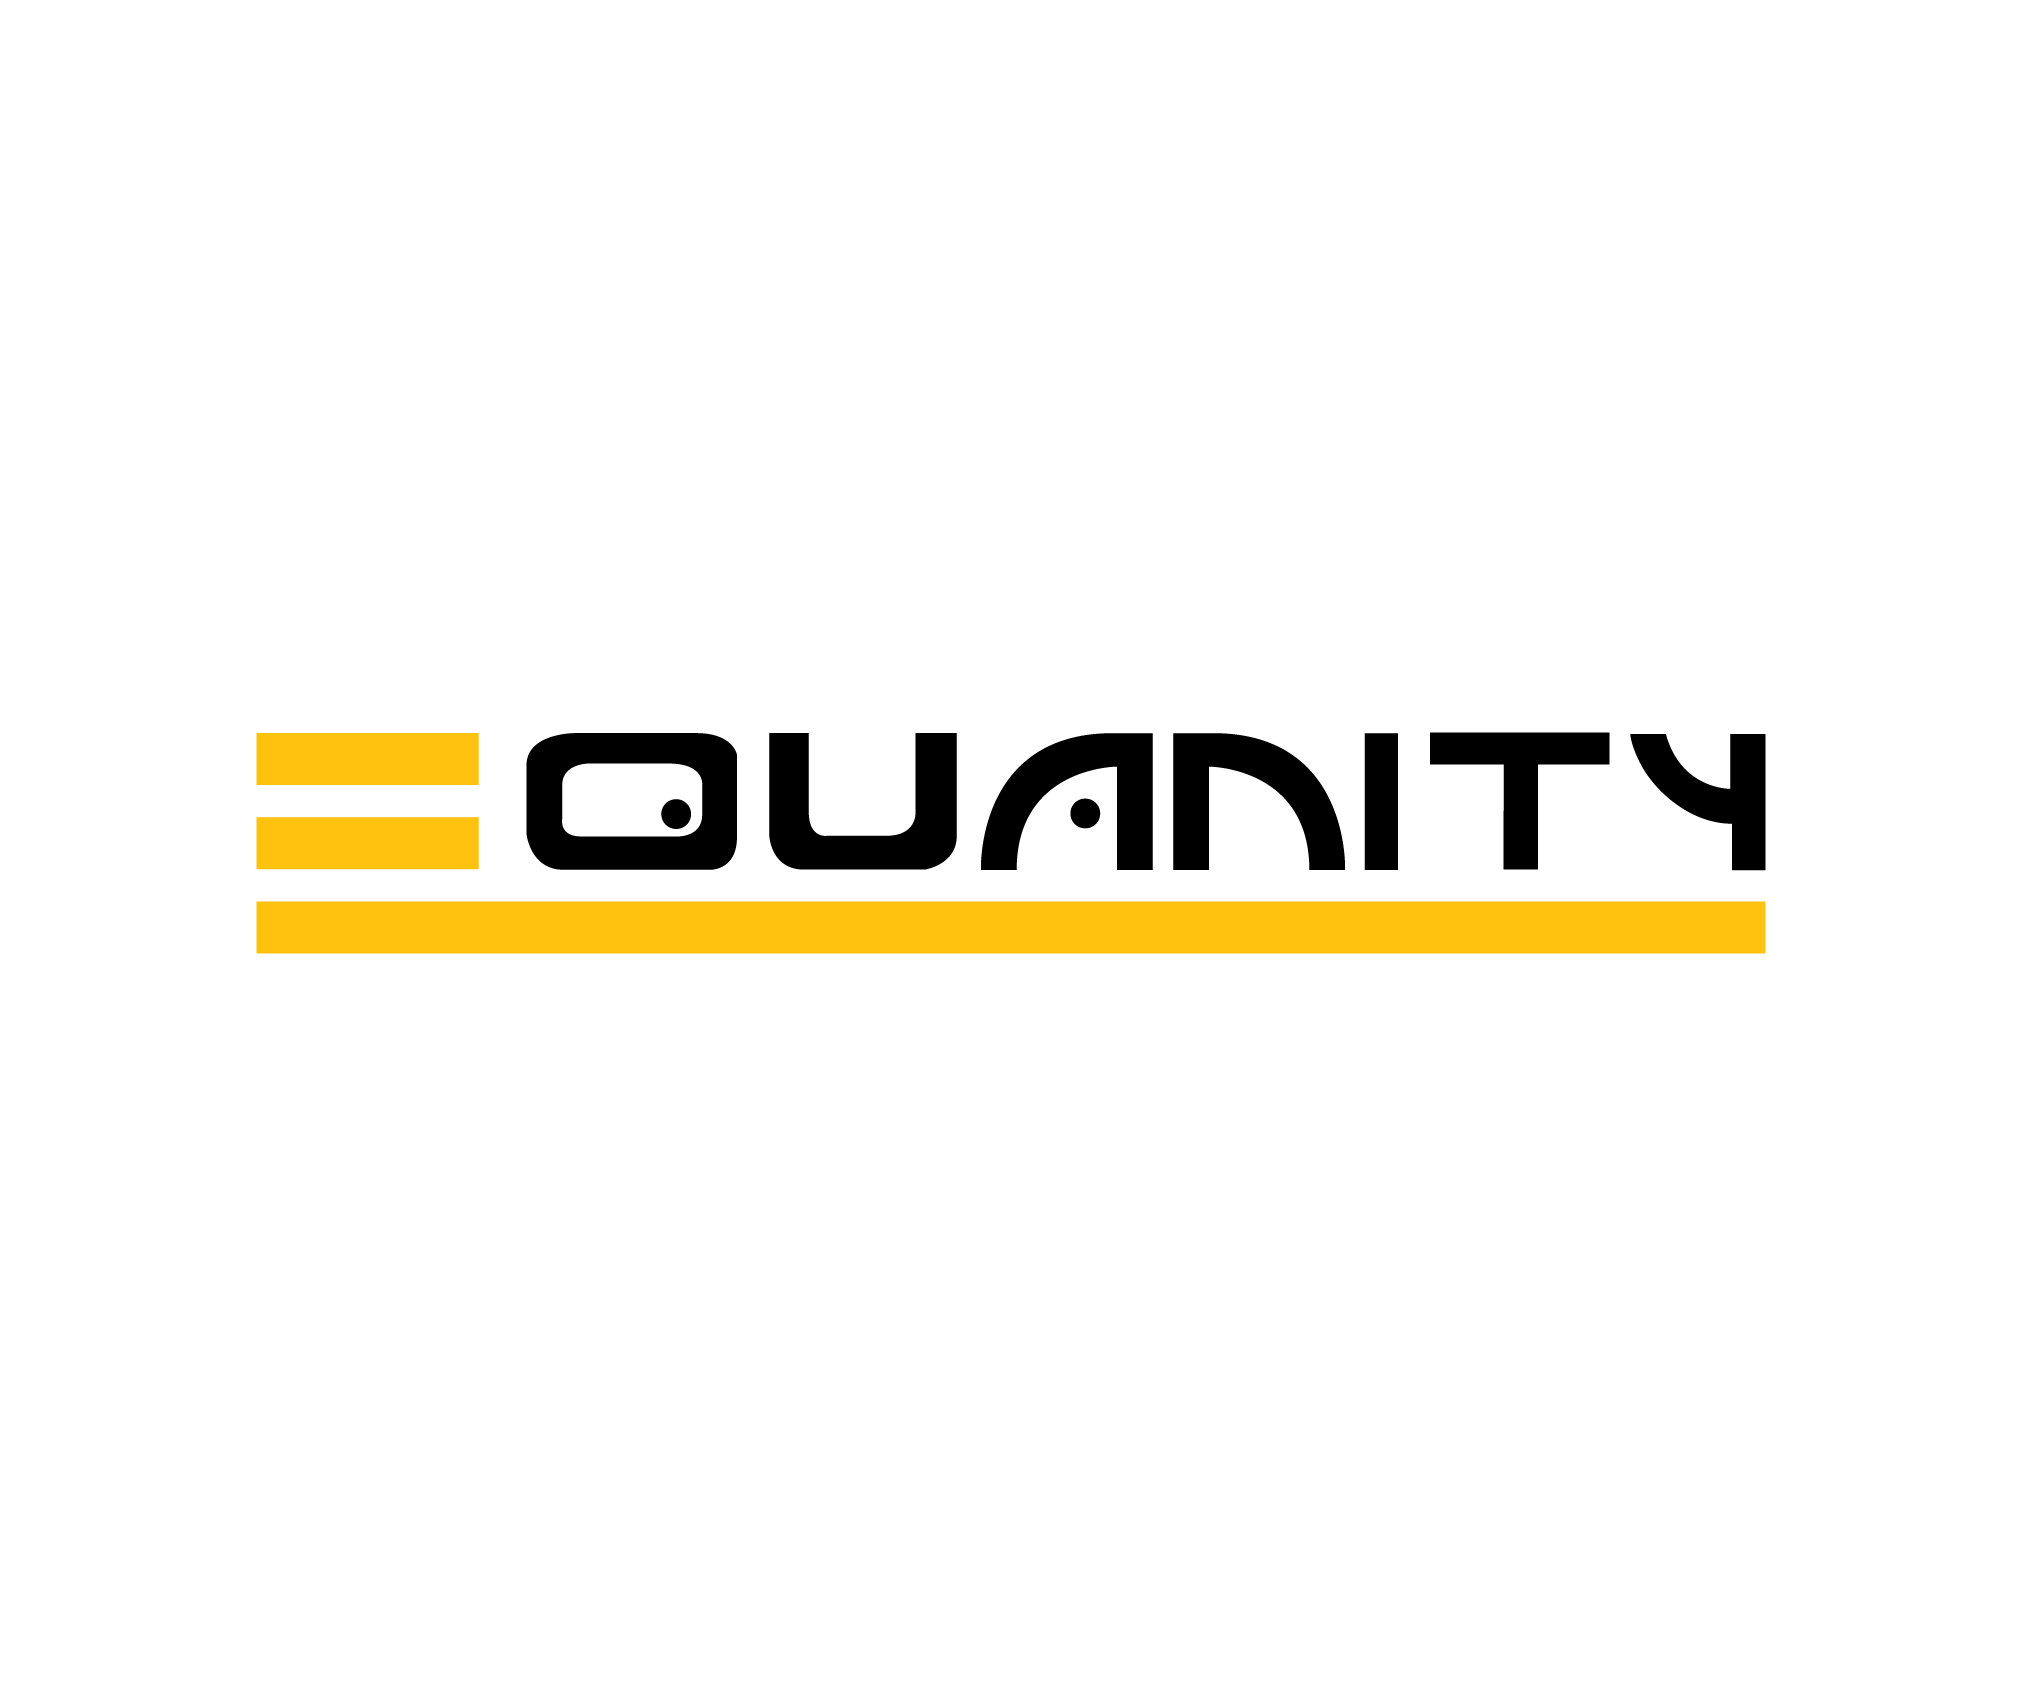 Client: Equanity (unofficially). Description: Concepted a logo for an organization promoting equality.